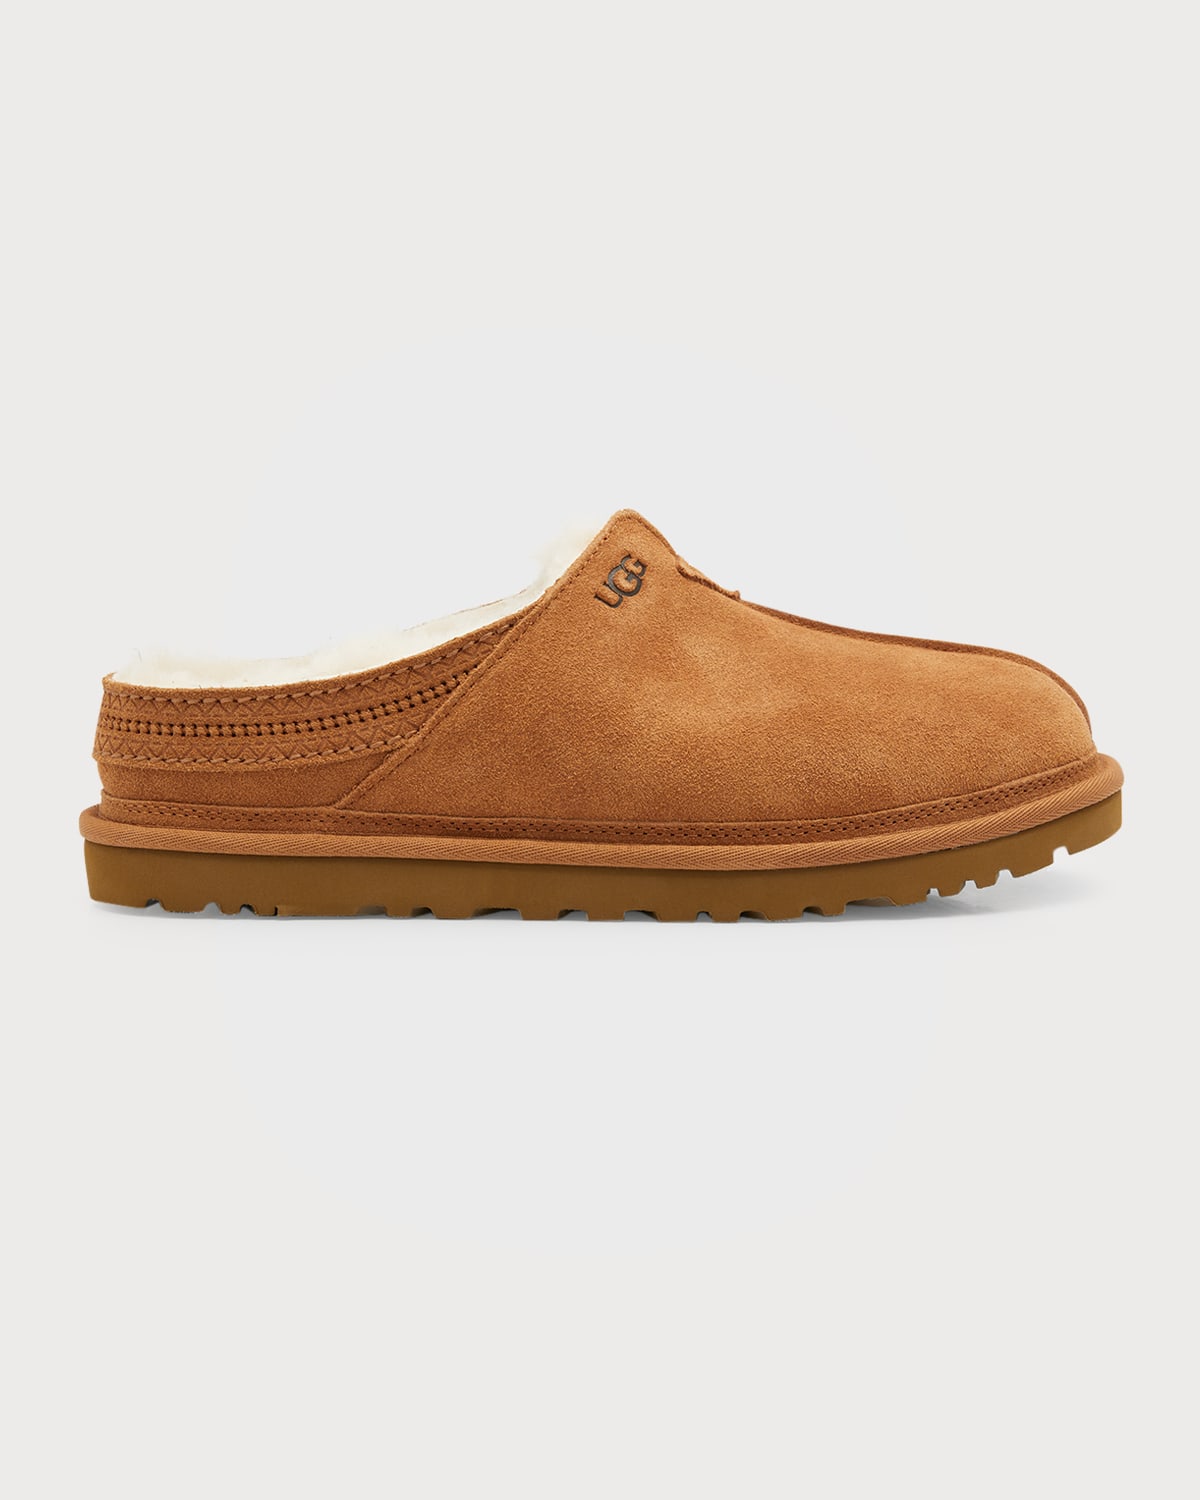 Men's Neuman Shearling-Lined Suede Slippers